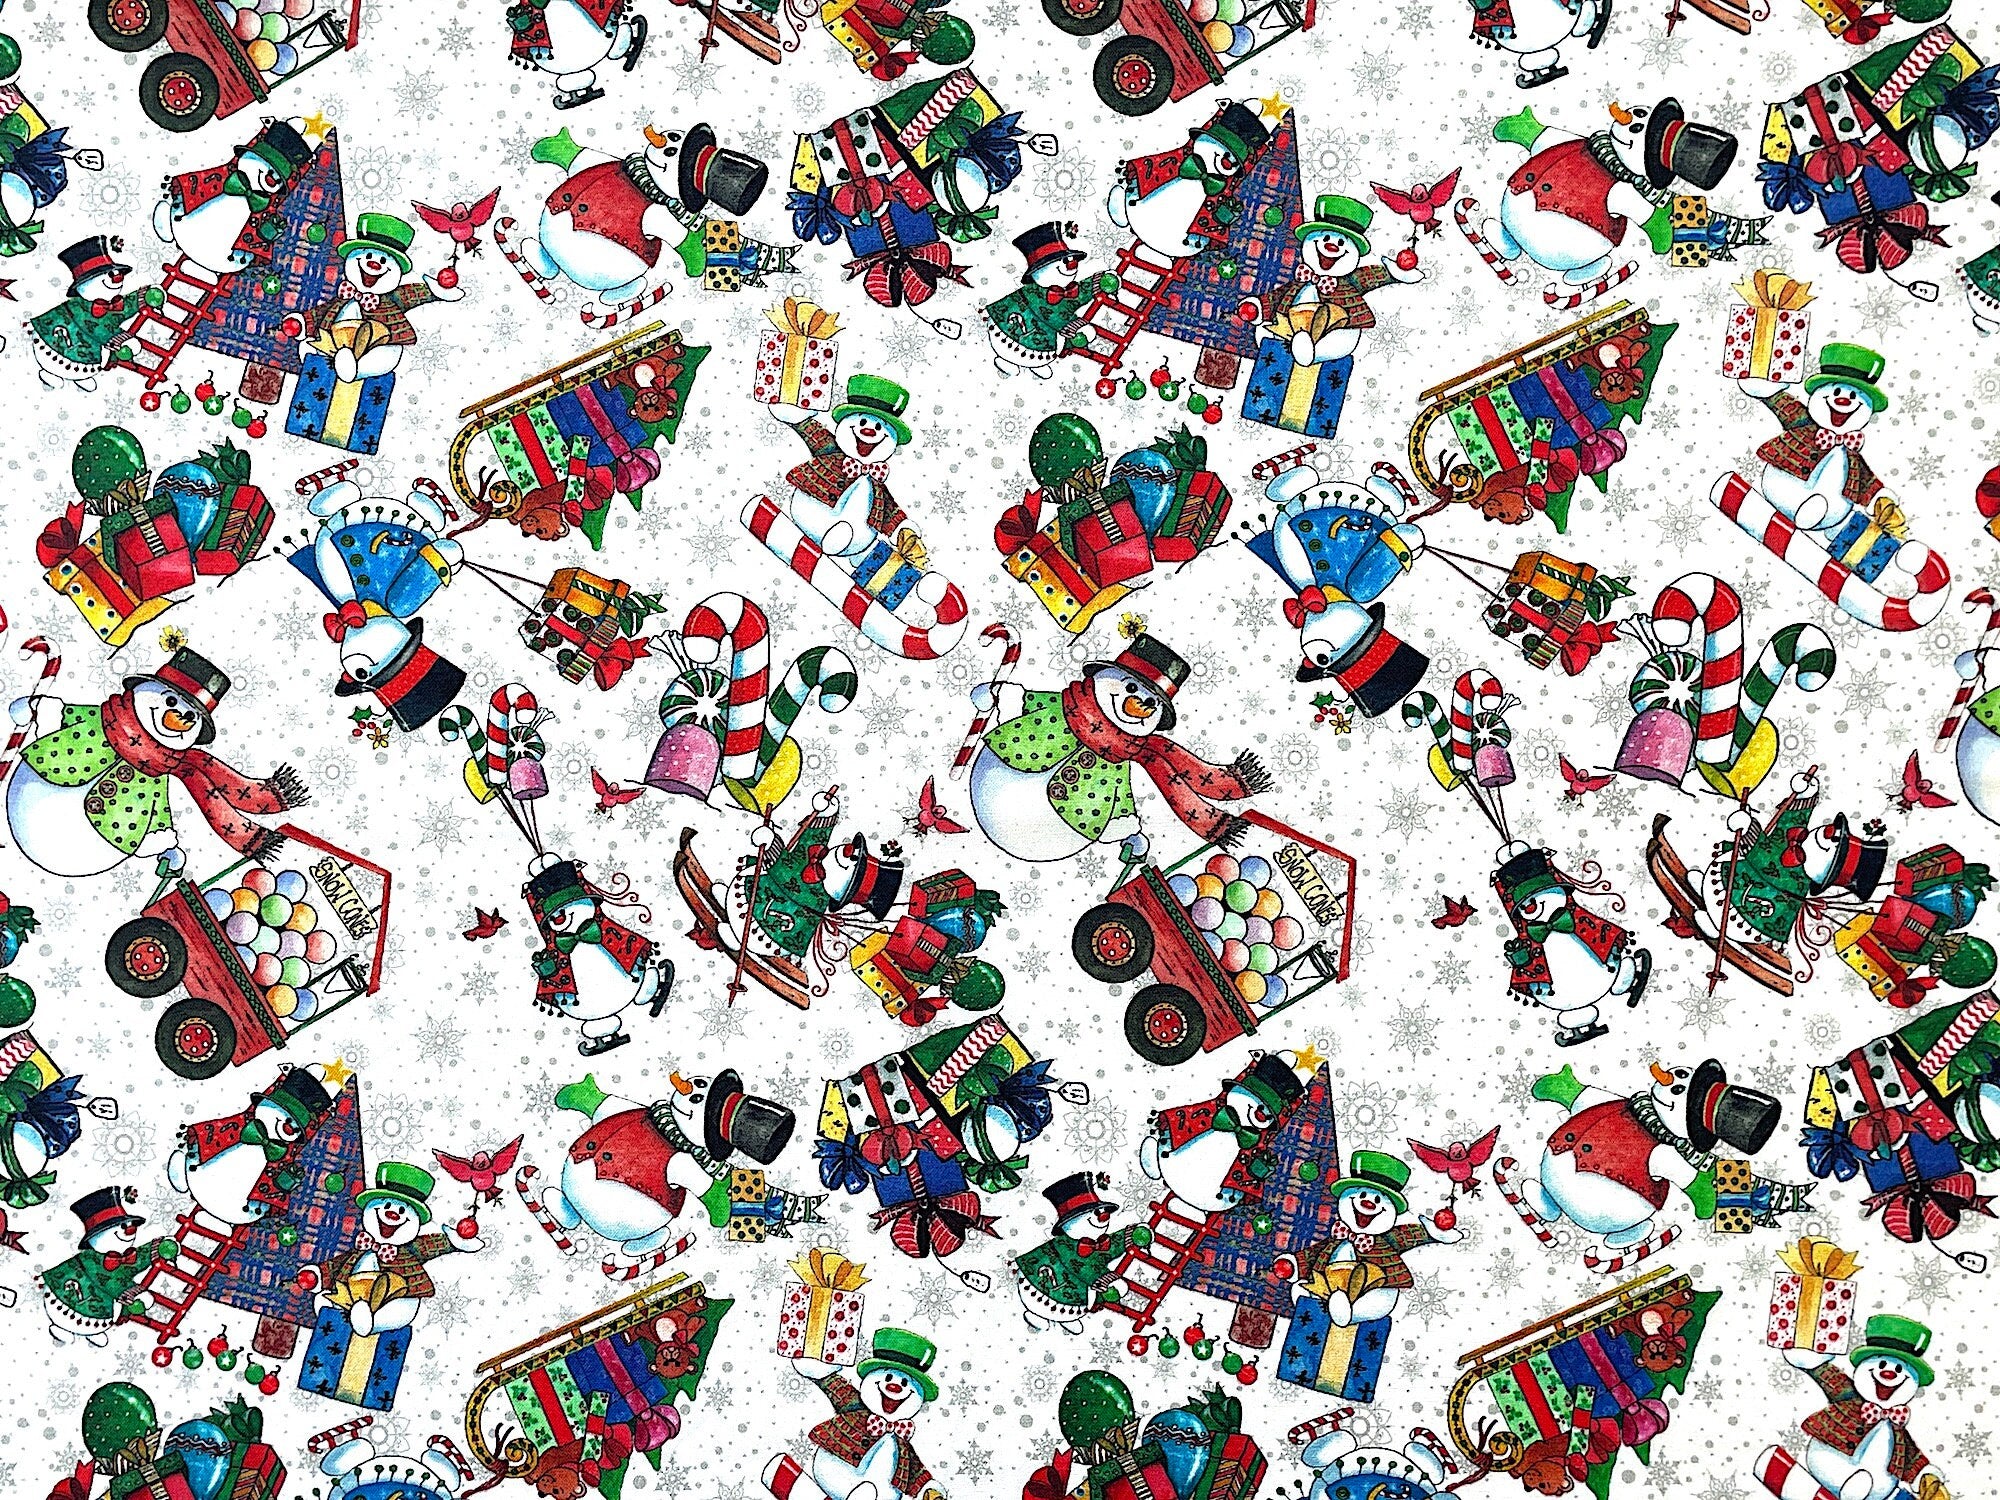 This fabric is part of the Snowman Follies collection. This white fabric is covered with snowmen, trees, presents, candy canes and more. Some of the snowmen are decorating trees, pulling sleds, walking in candy cane skis and more